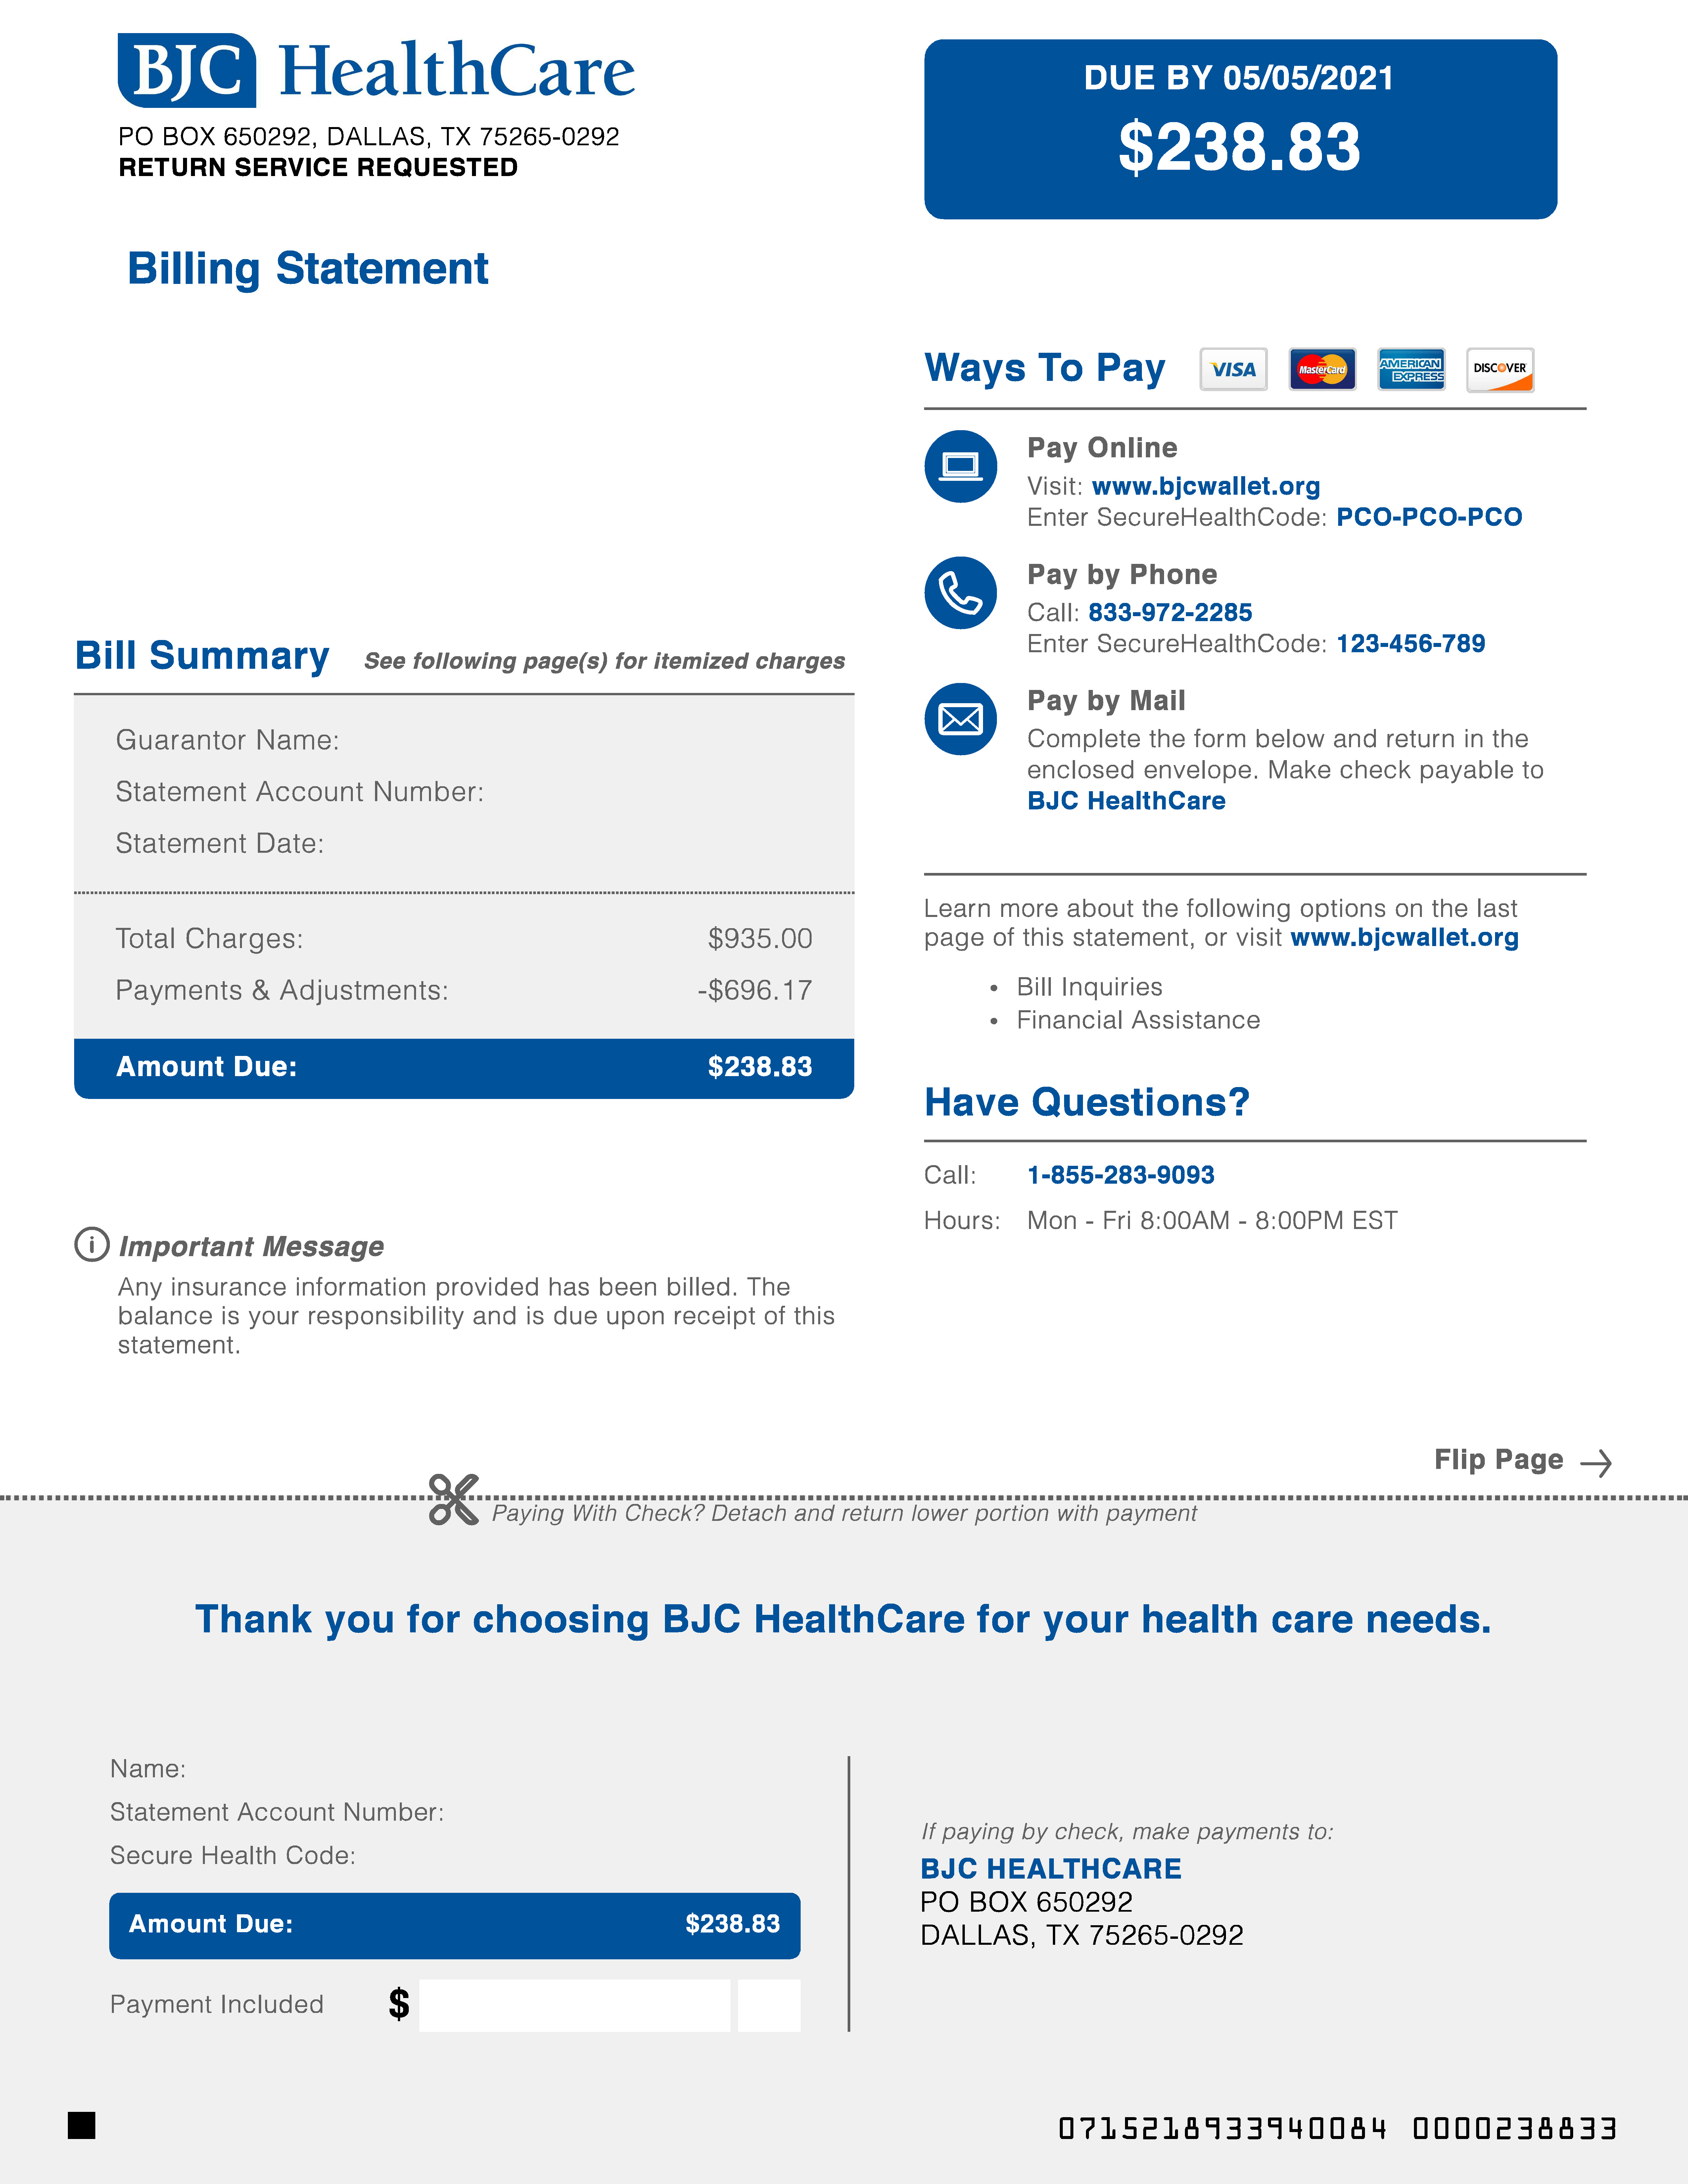 BJC HealthCare statement that indicates "Pay Online. Visit www.bjcwallet.org" in the "Ways to Pay" section in the middle of the right side.